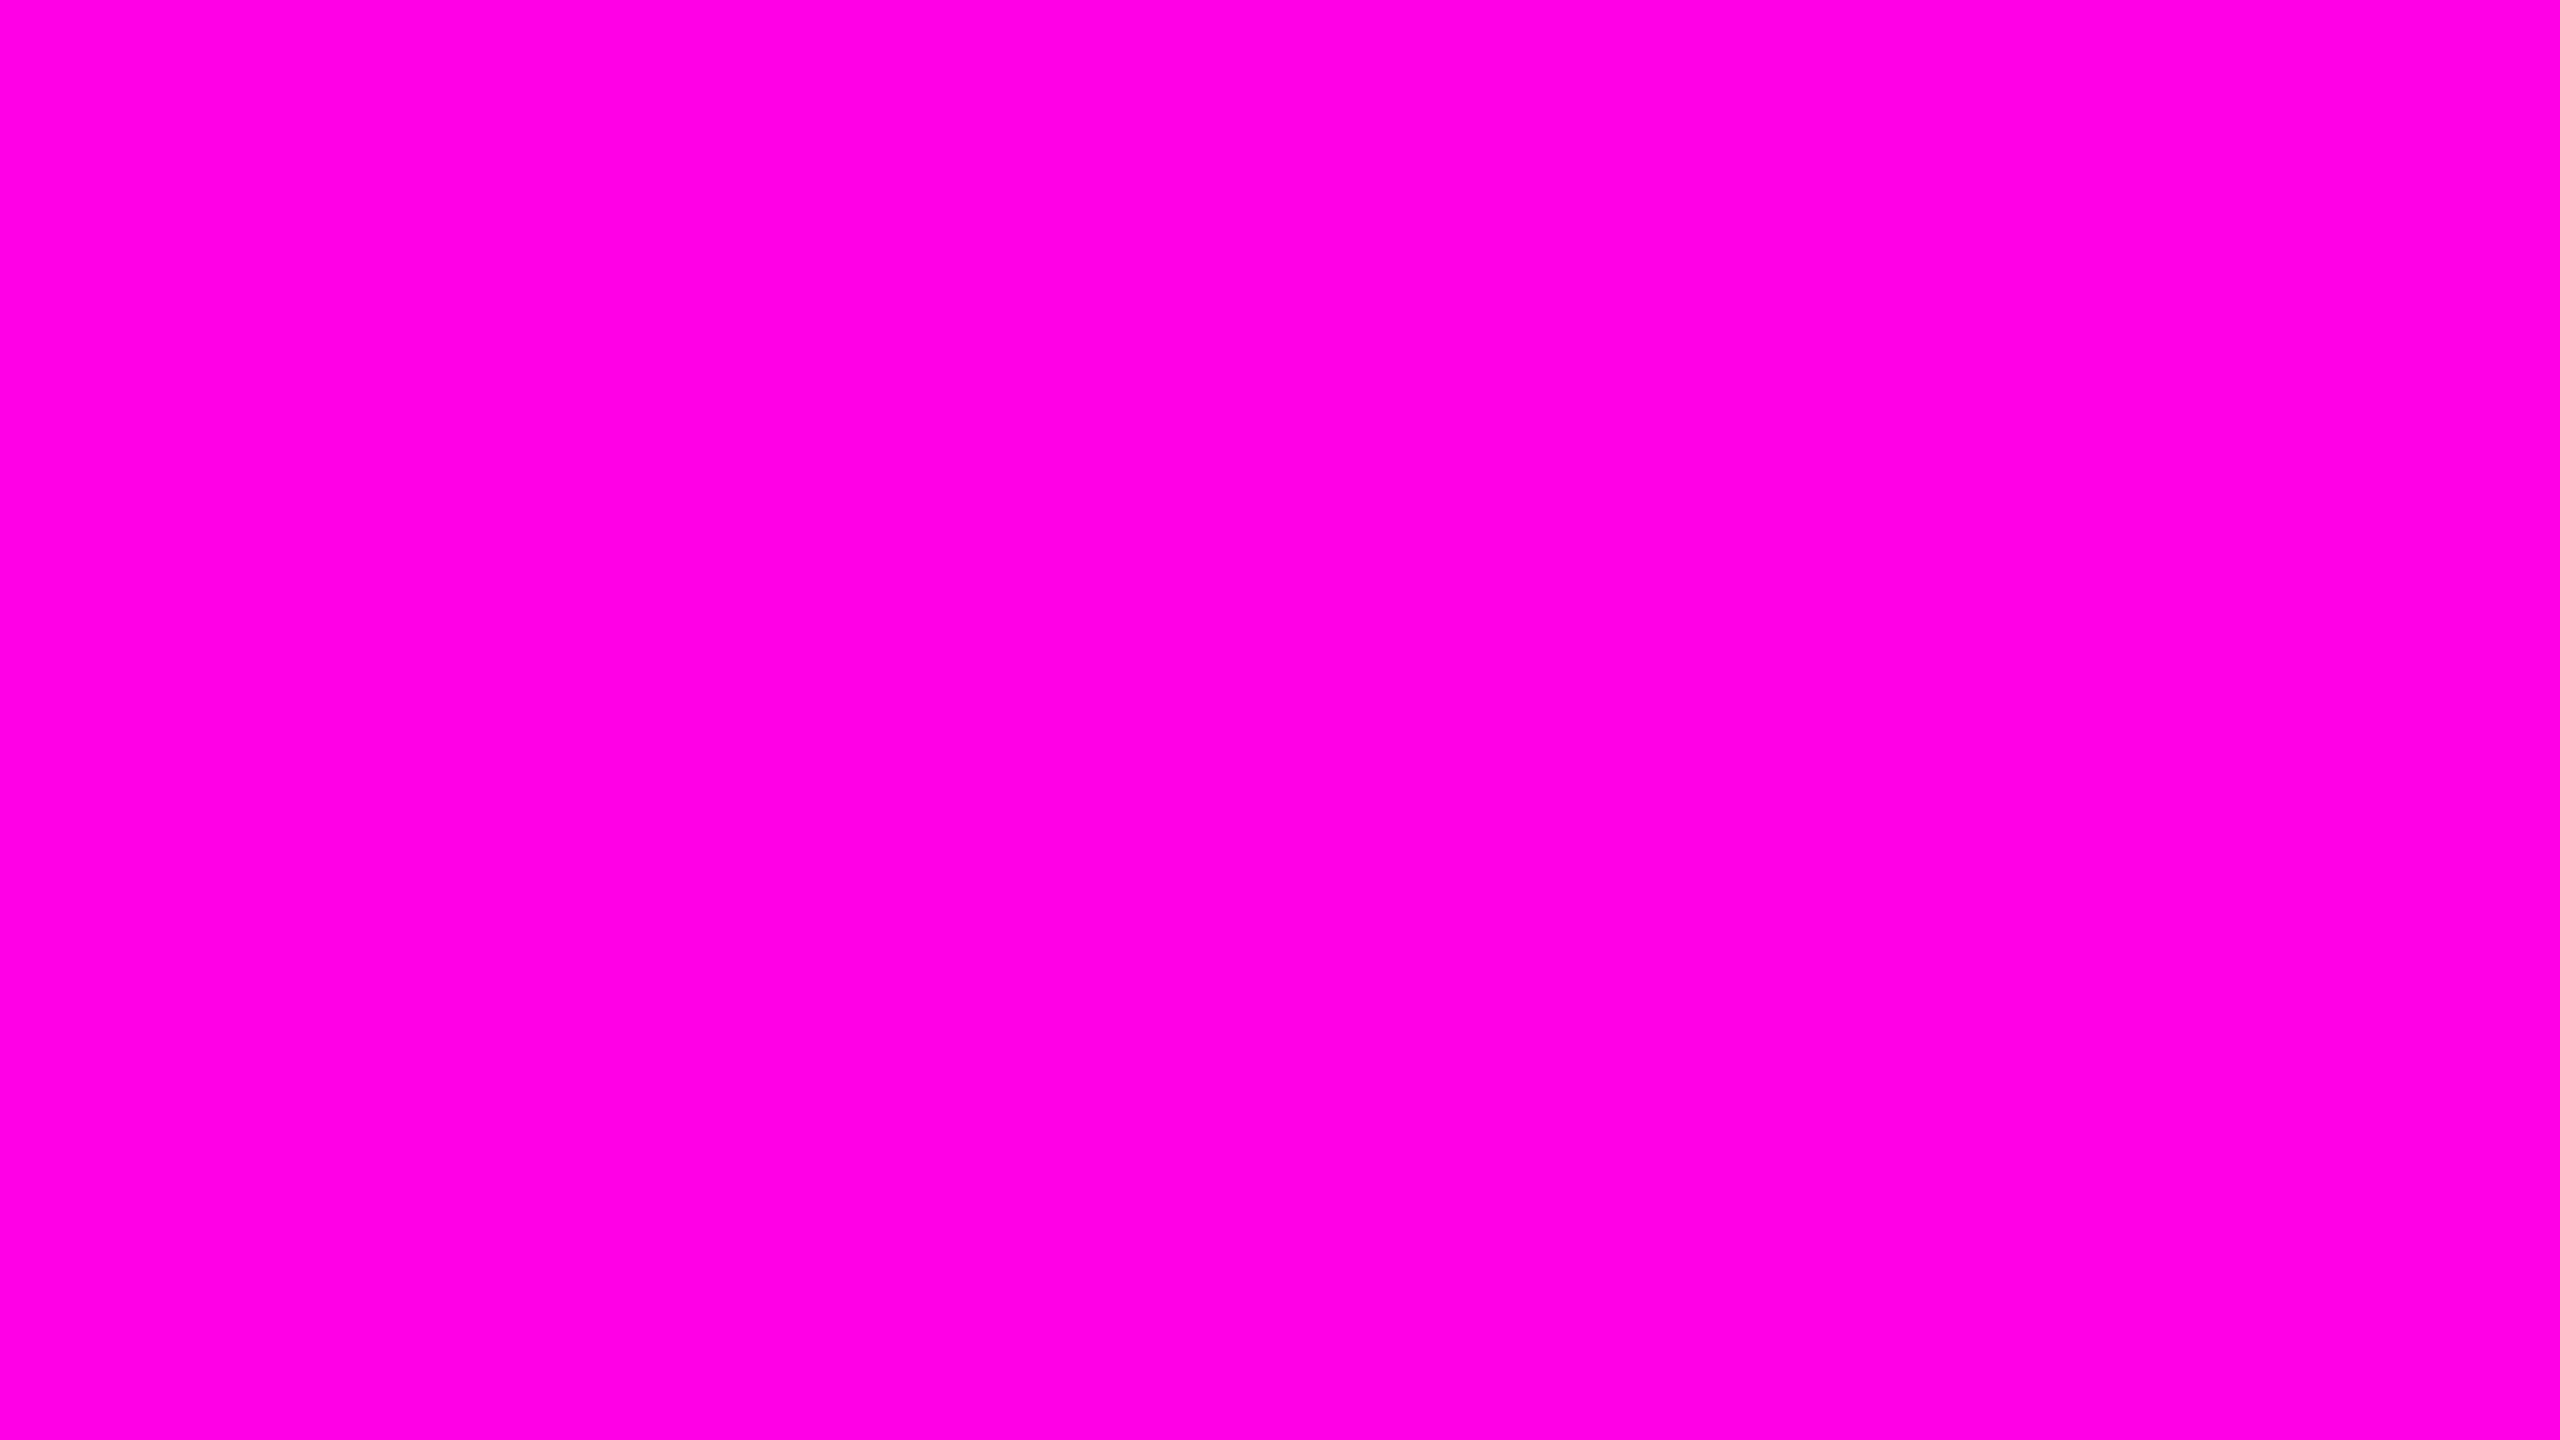 A vibrant bright pink background